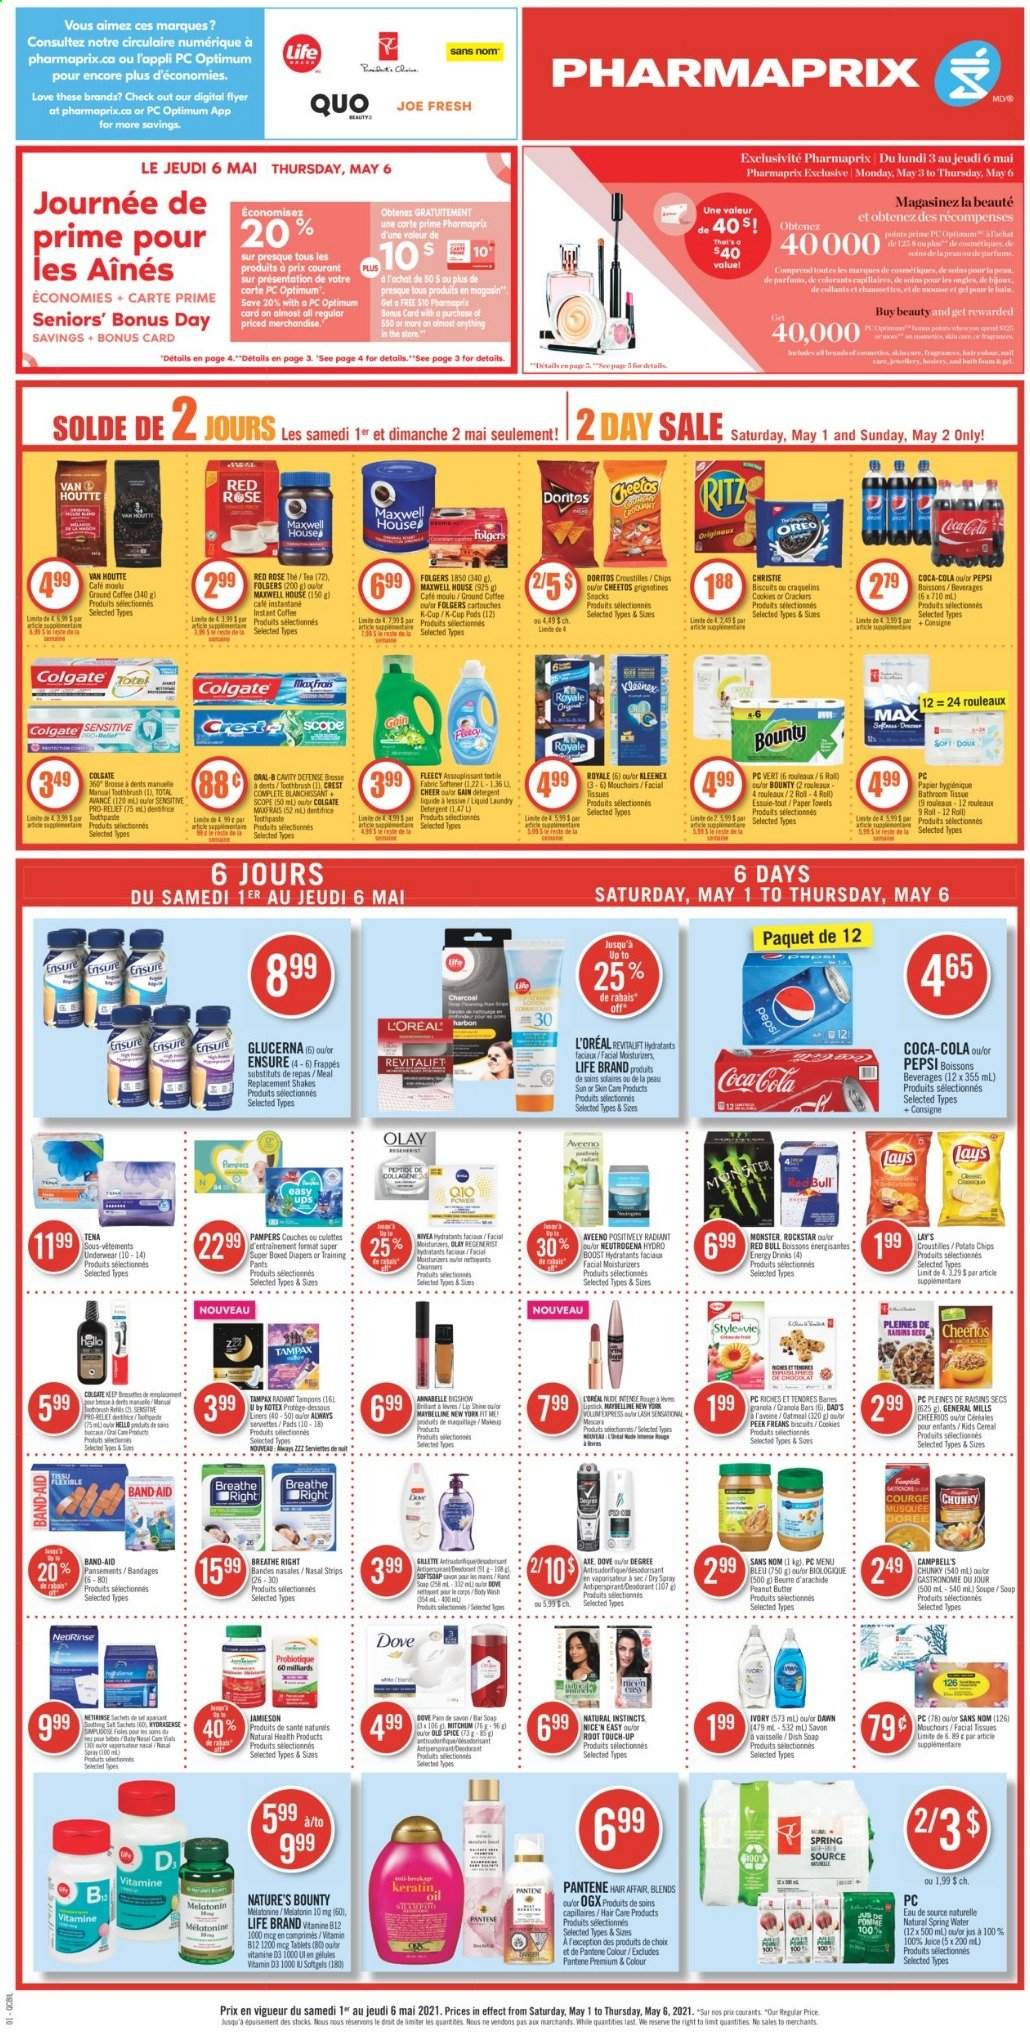 thumbnail - Pharmaprix Flyer - May 01, 2021 - May 06, 2021 - Sales products - Campbell's, soup, shake, cookies, snack, crackers, biscuit, RITZ, Doritos, potato chips, Cheetos, Lay’s, oatmeal, cereals, Cheerios, granola bar, spice, peanut butter, dried fruit, Coca-Cola, Pepsi, juice, energy drink, Monster, Red Bull, Rockstar, spring water, Boost, Maxwell House, instant coffee, Folgers, ground coffee, coffee capsules, K-Cups, rosé wine, pants, nappies, baby pants, Aveeno, bath tissue, Kleenex, kitchen towels, paper towels, Gain, fabric softener, laundry detergent, body wash, hand soap, soap bar, soap, toothbrush, toothpaste, Crest, Kotex, tampons, facial tissues, L’Oréal, Olay, OGX, Root Touch-Up, anti-perspirant, lipstick, rose, Melatonin, Nature's Bounty, Glucerna, vitamin B12, vitamin D3, Oreo, Maybelline, Neutrogena, raisins, Tampax, Pampers, Pantene, Nivea, Old Spice, Oral-B, chips. Page 1.